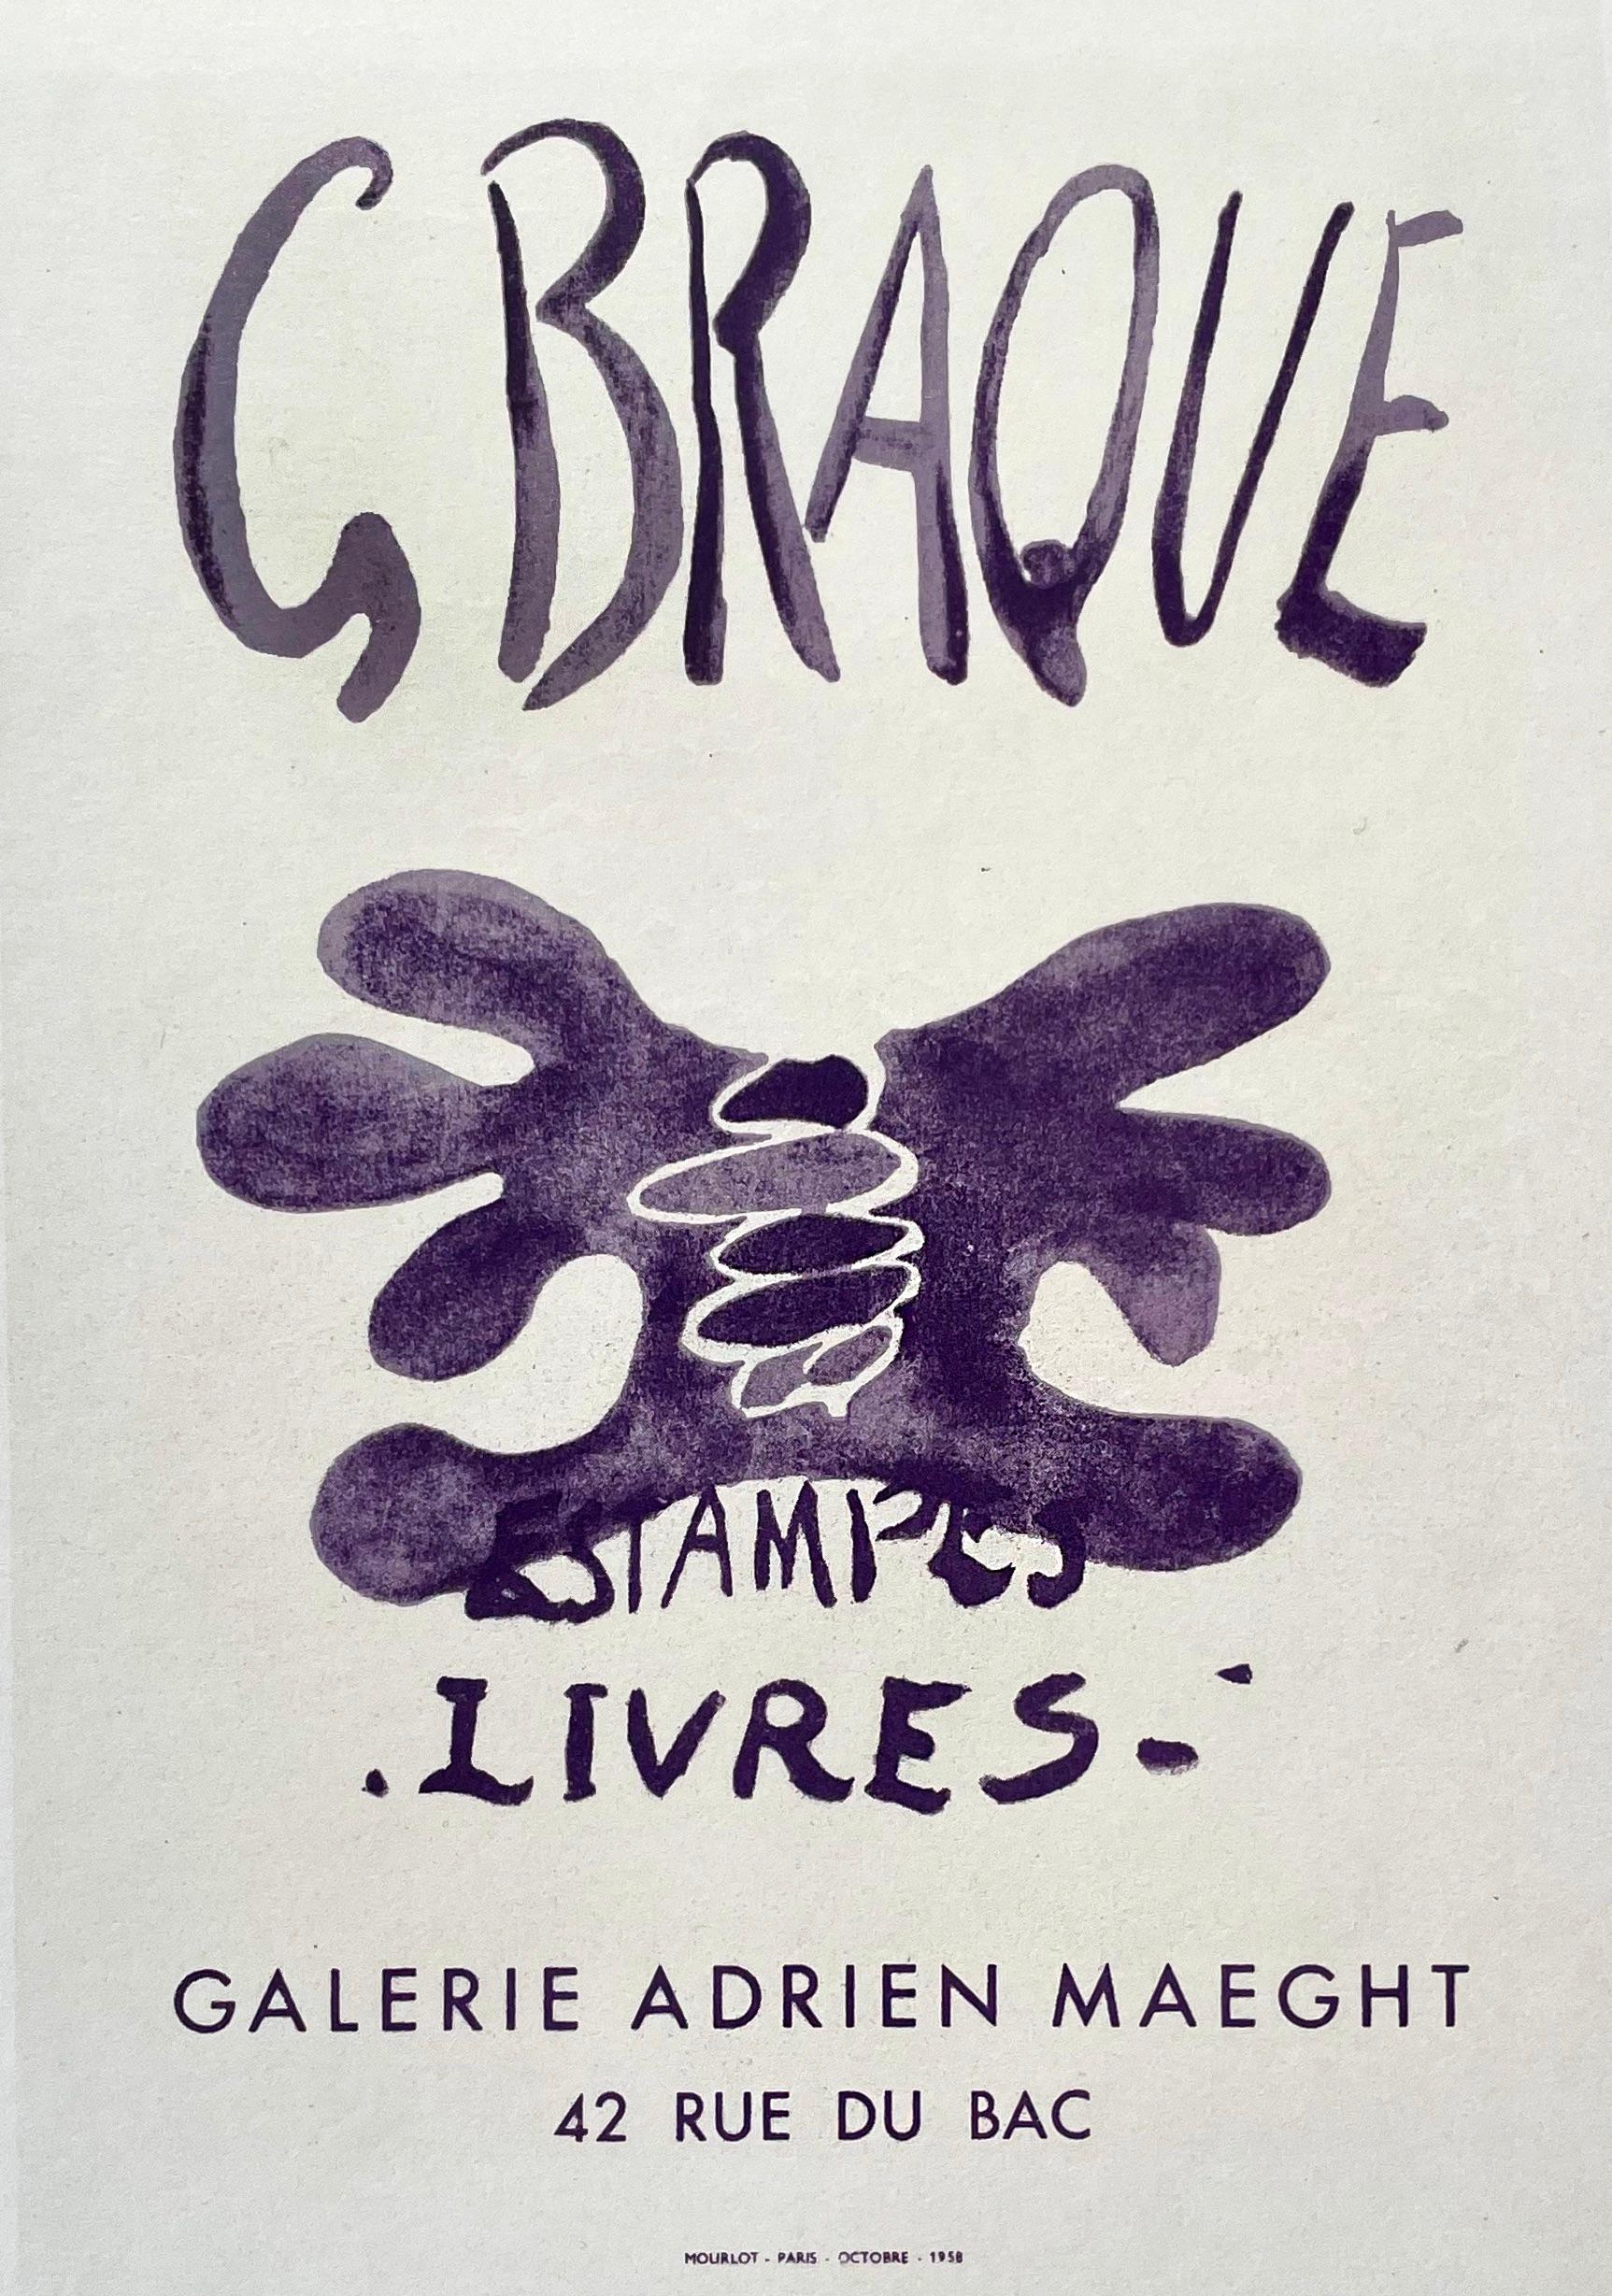 (after) Georges Braque Abstract Print - Abstract Art Exhibition Poster by Georges Braques, Modernist Lithograph 1959